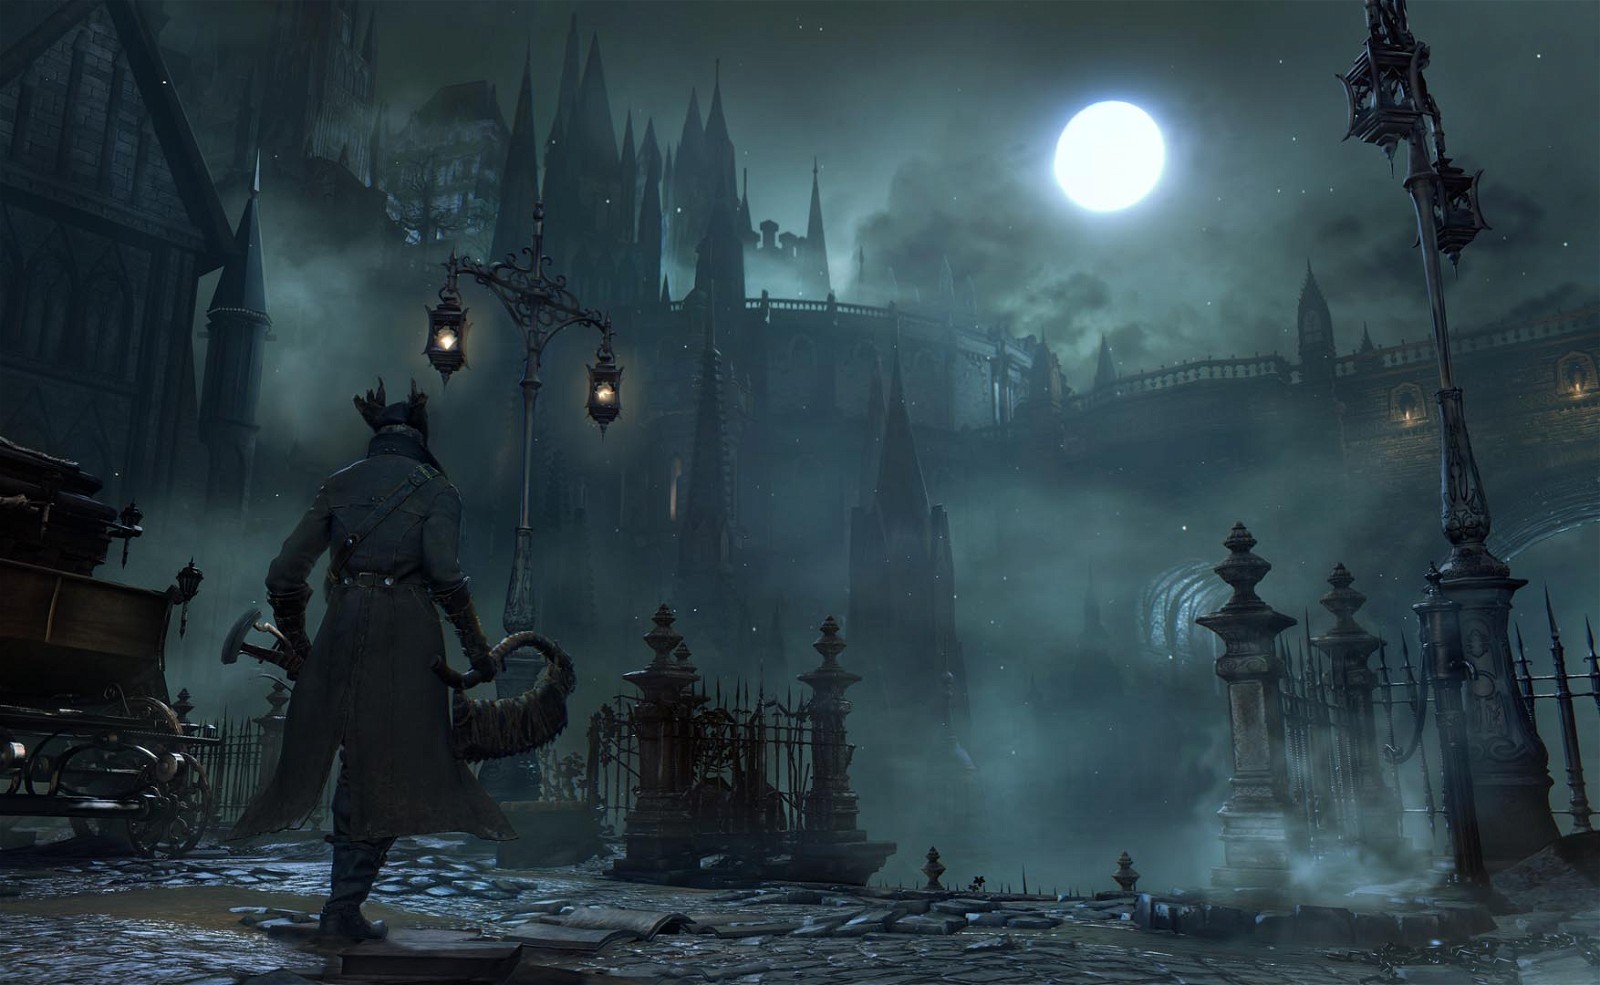 What's next for Bloodborne?